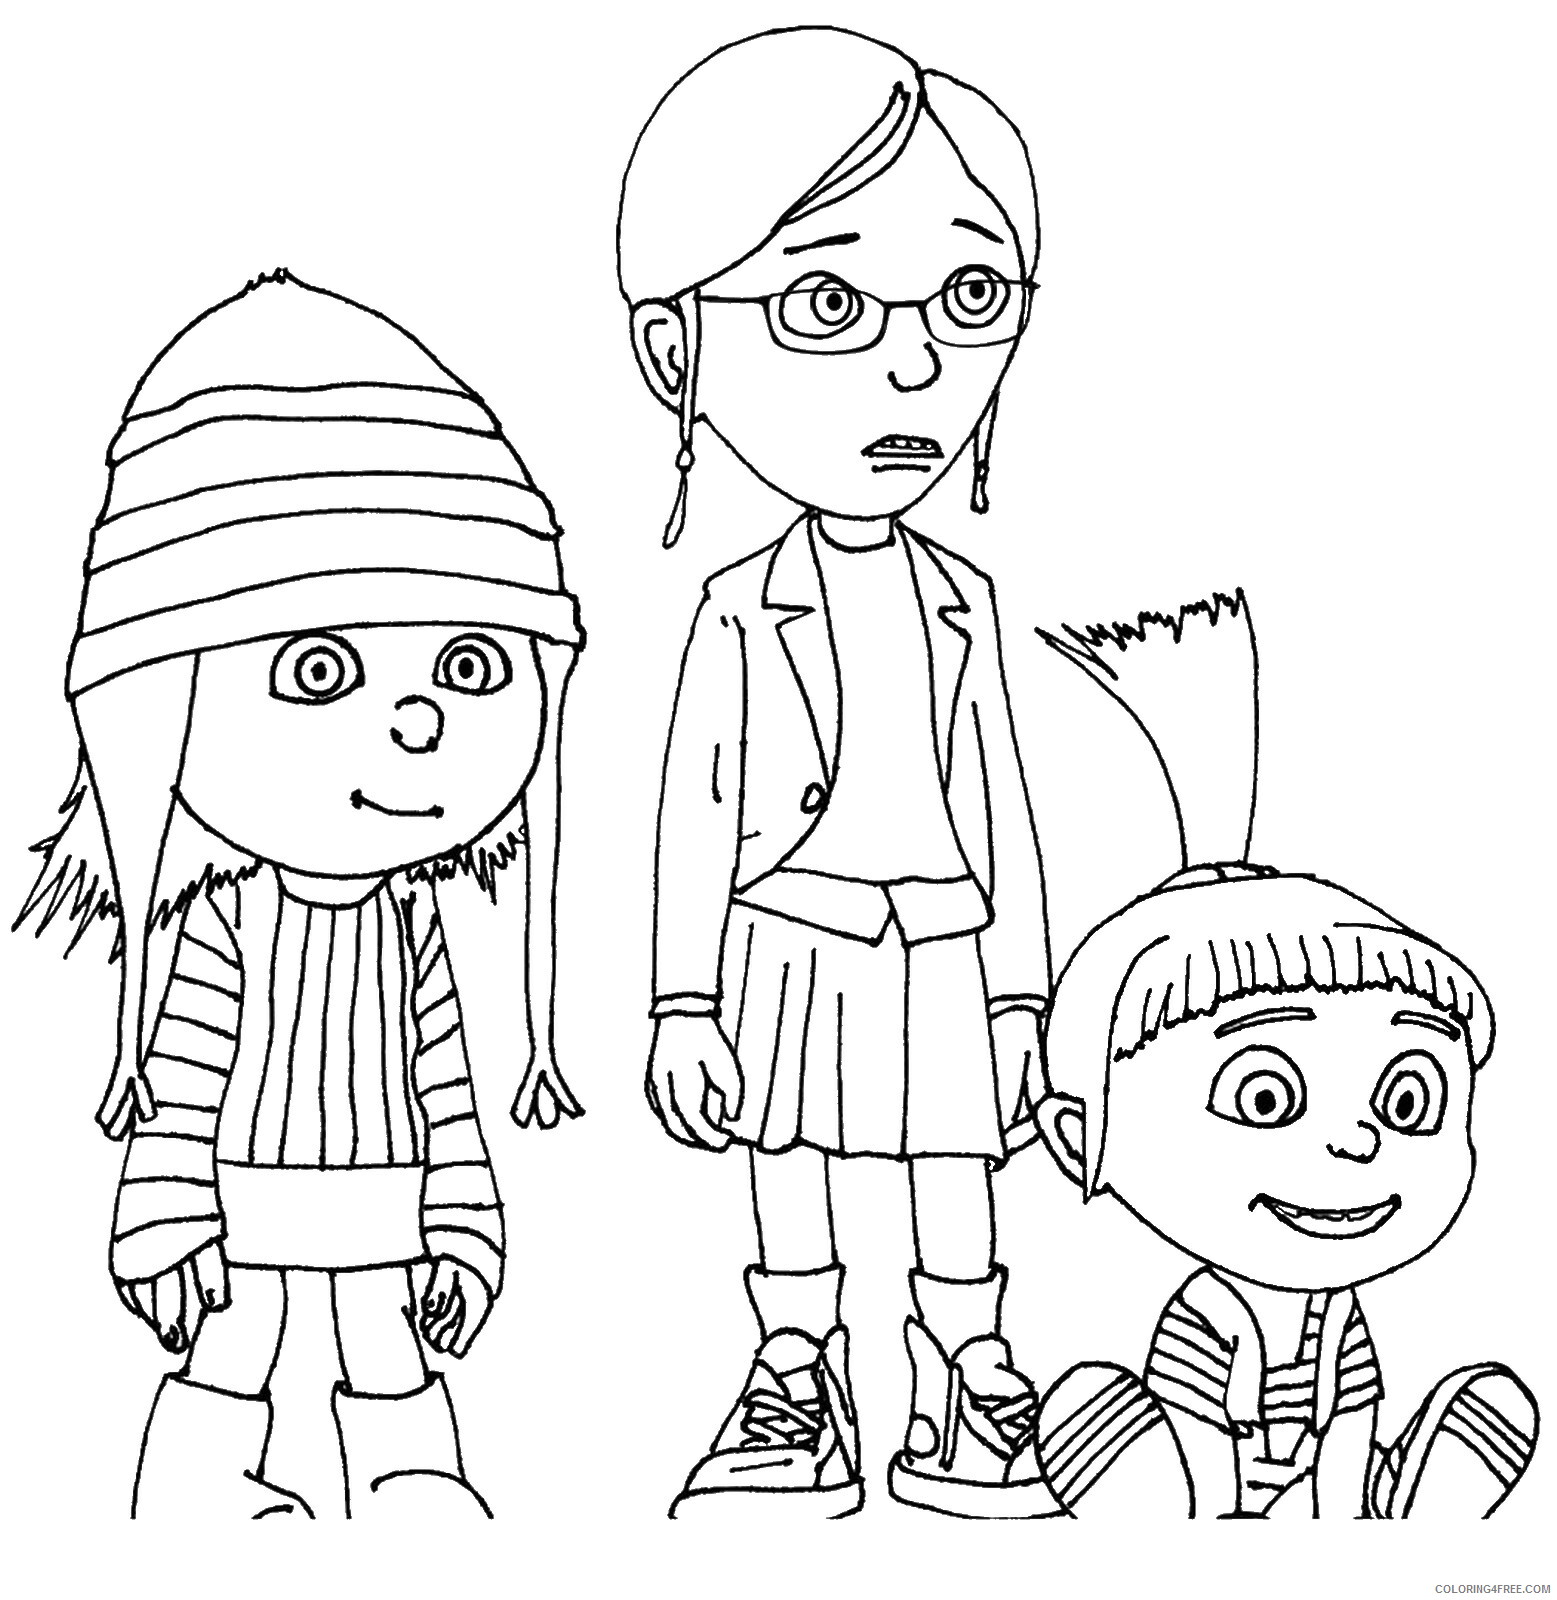 Despicable Me Coloring Pages TV Film despicable_me_cl_15 Printable 2020 02480 Coloring4free